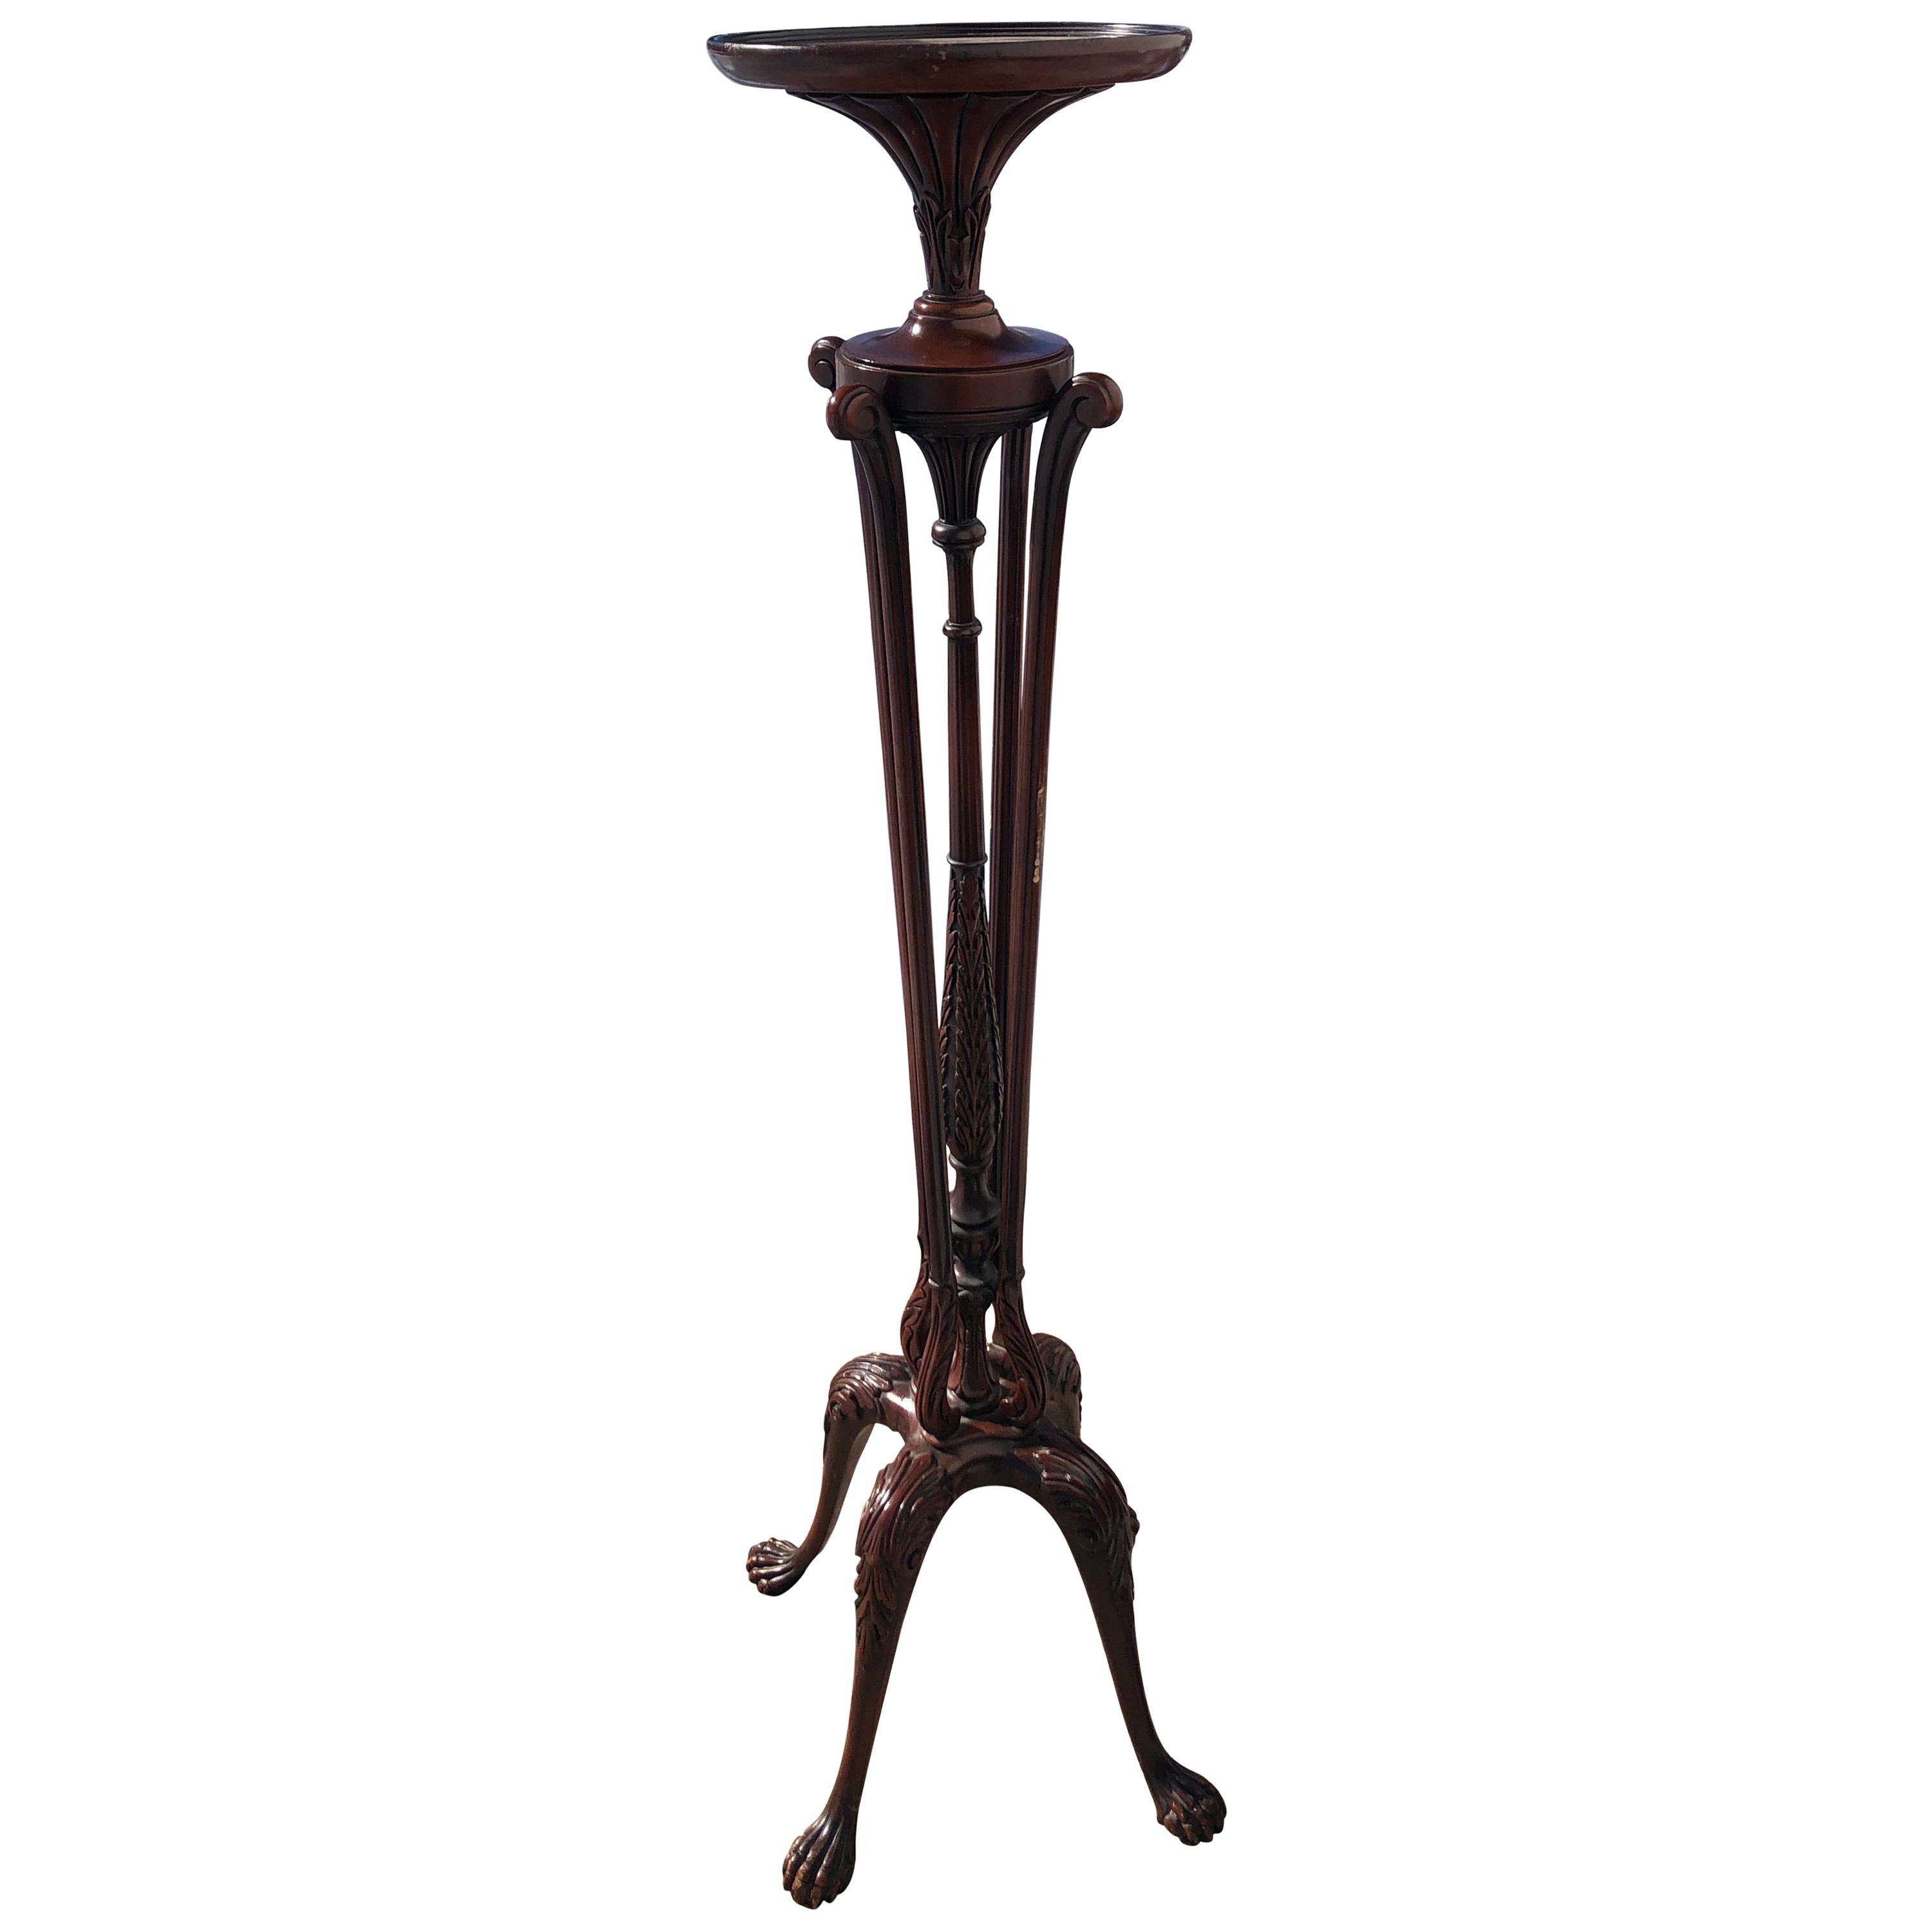 Classic Georgian Style Carved Mahogany Torchiere Plant Stand